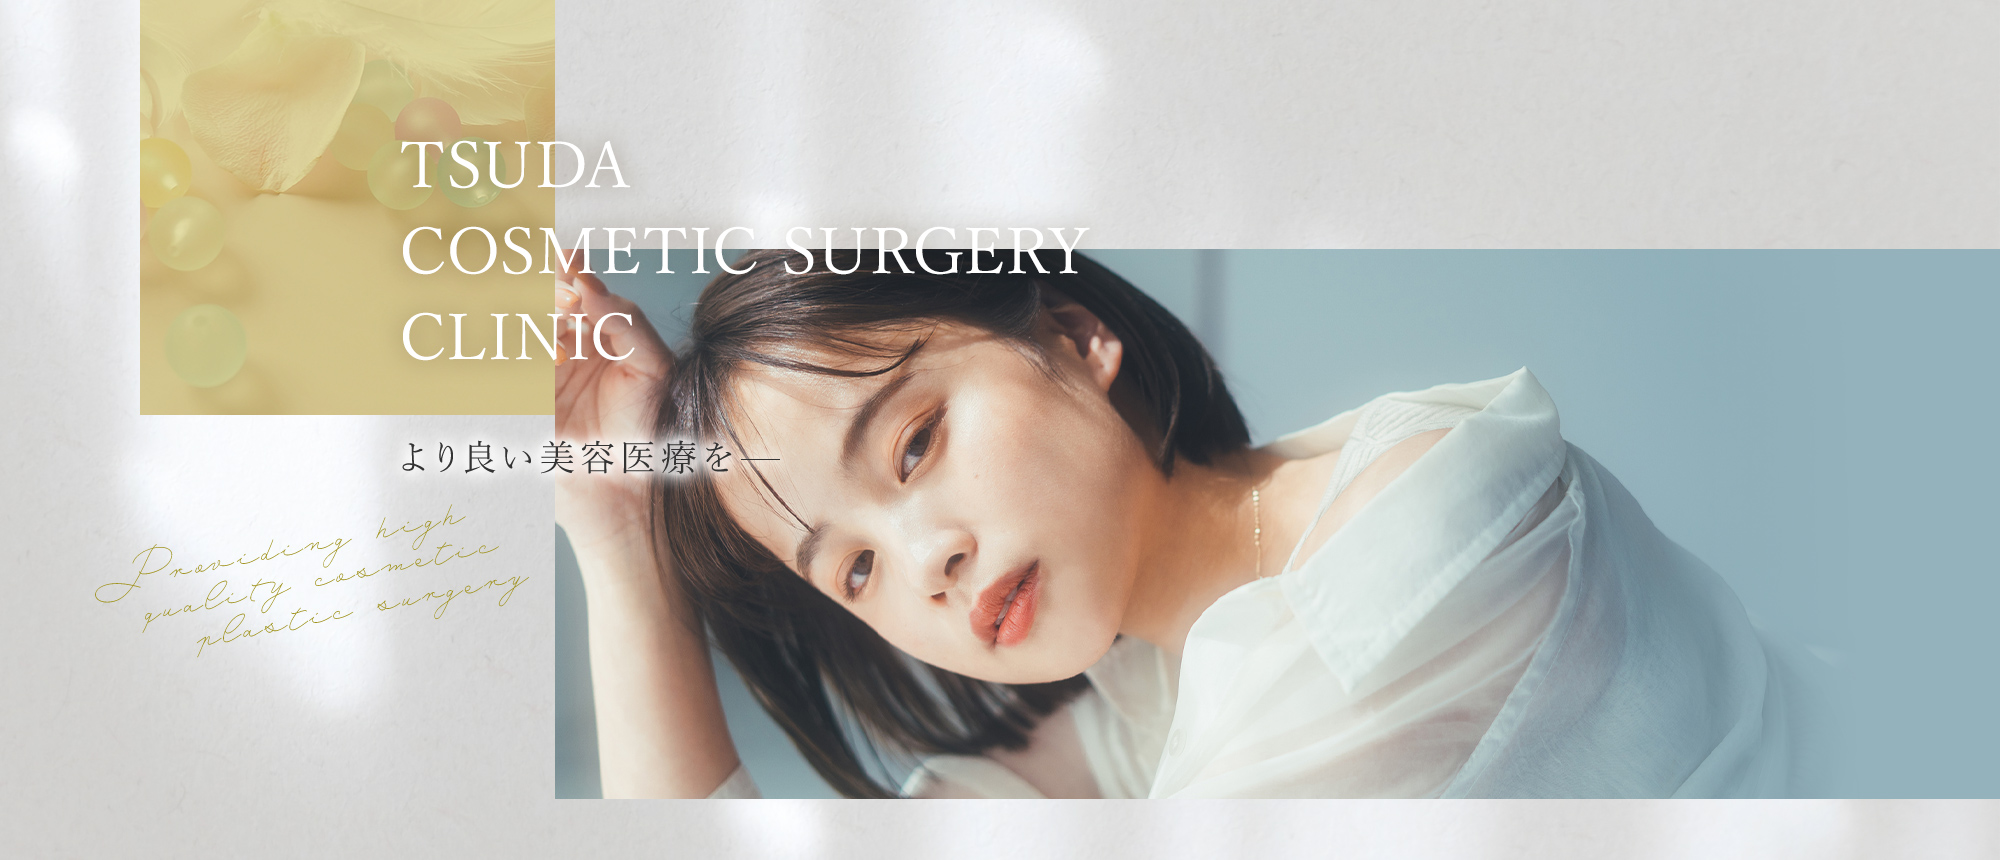 TSUDA COSMETIC SURGERY CLINIC より良い美容医療を